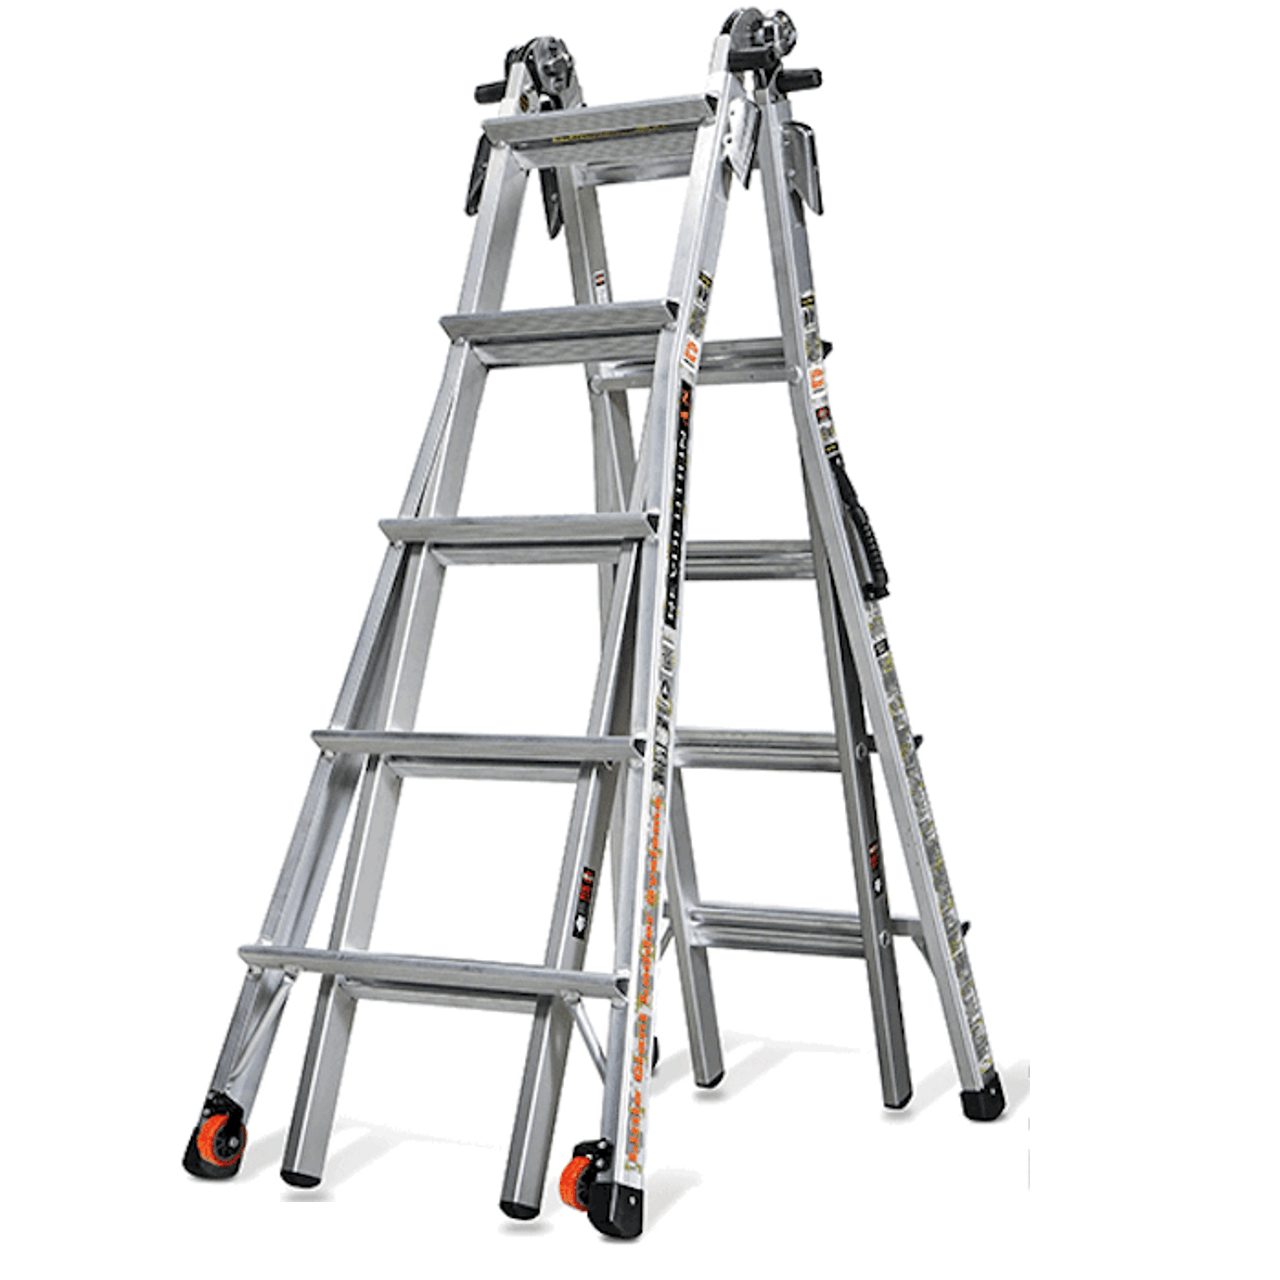 little giant ladder 22' review